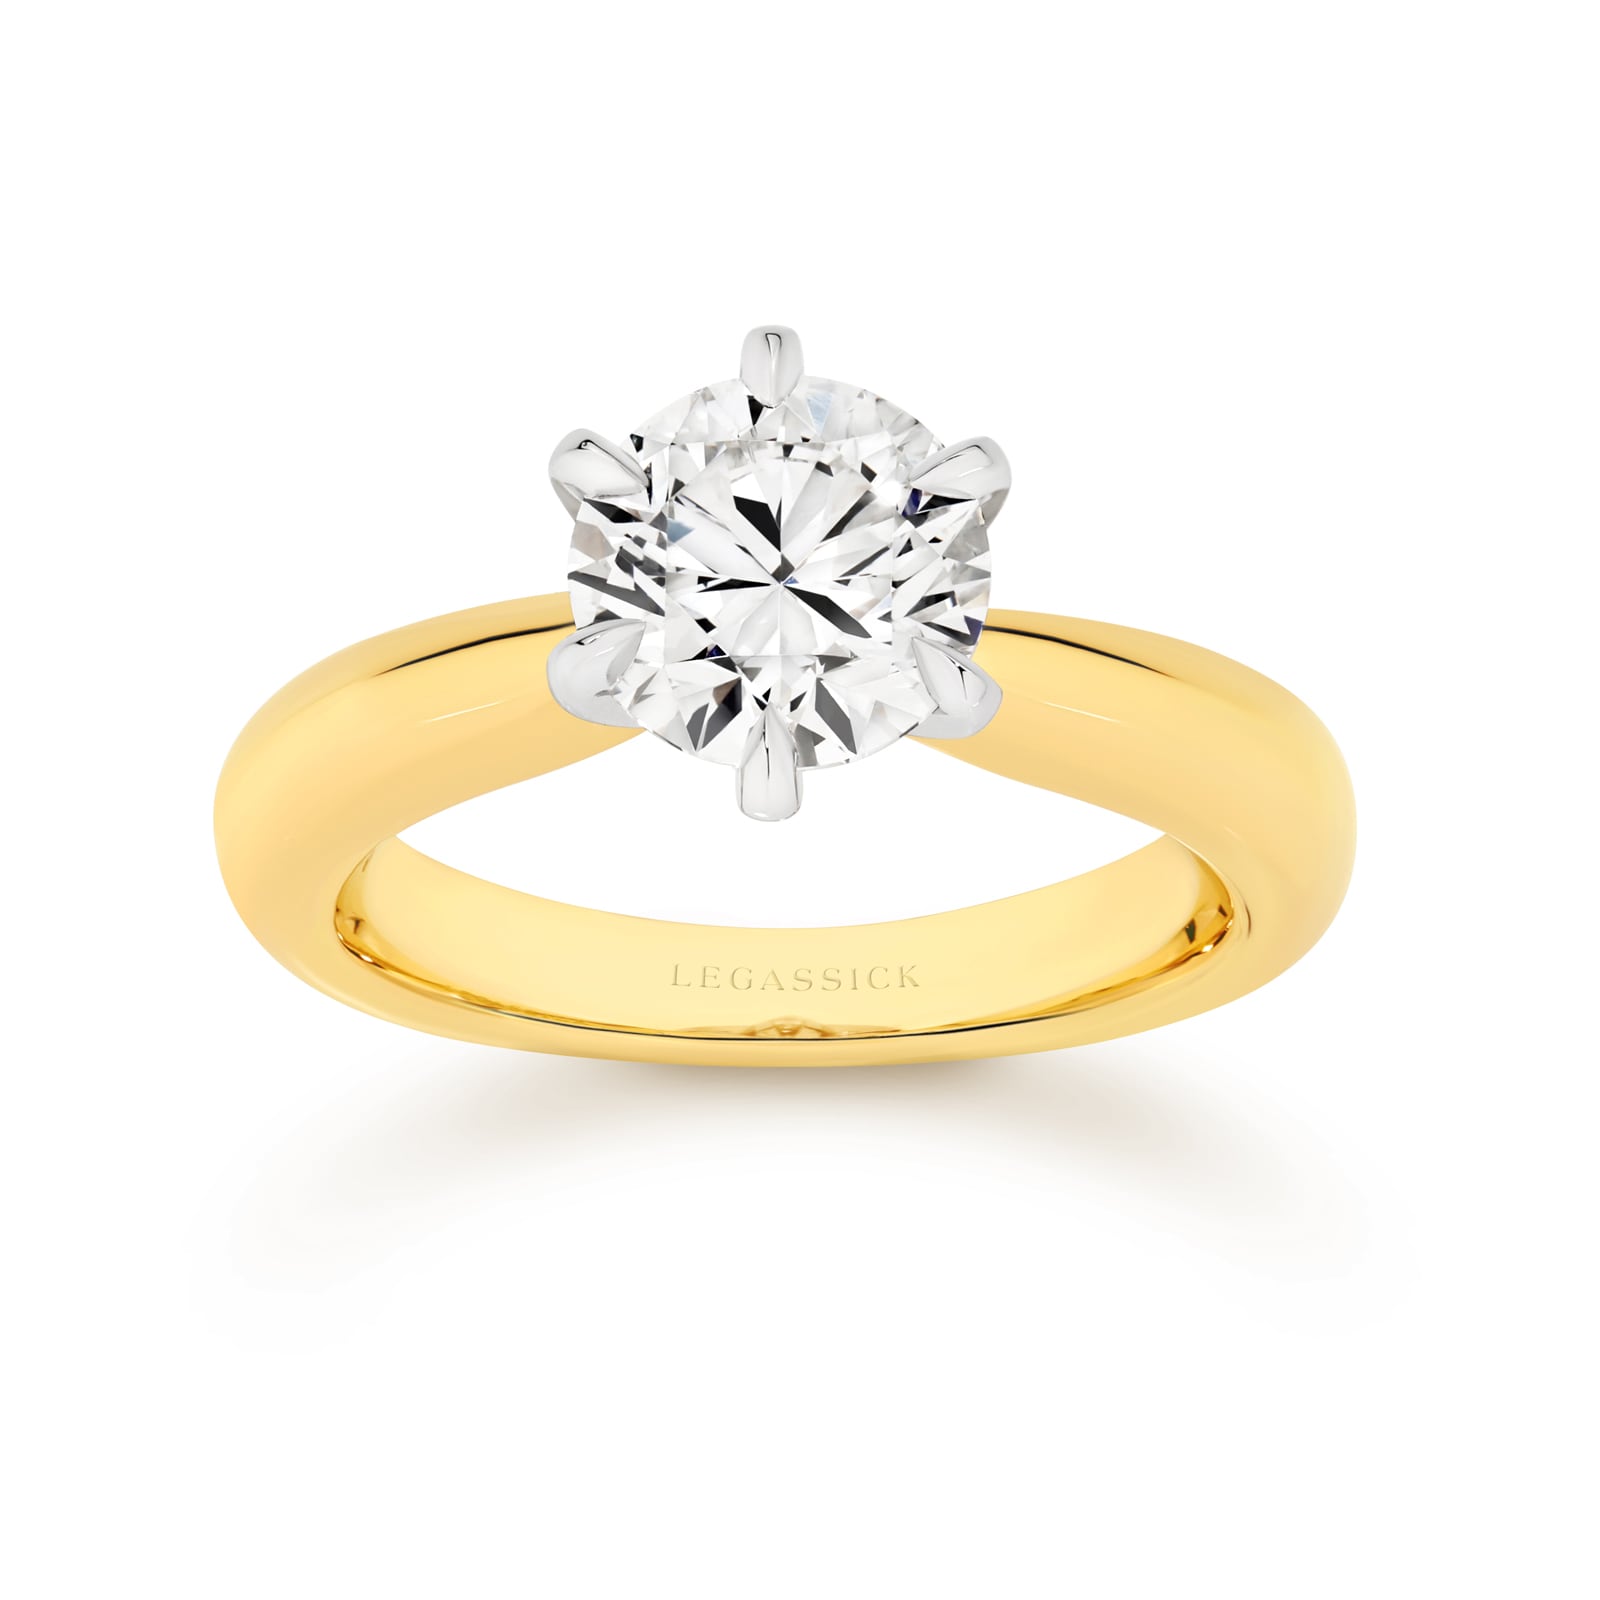 Marilyn is stunning 2.24 carat round brilliant cut solitaire diamond ring. She was designed and handcrafted by LeGassick's Master Jewellers, Gold Coast, Australia.